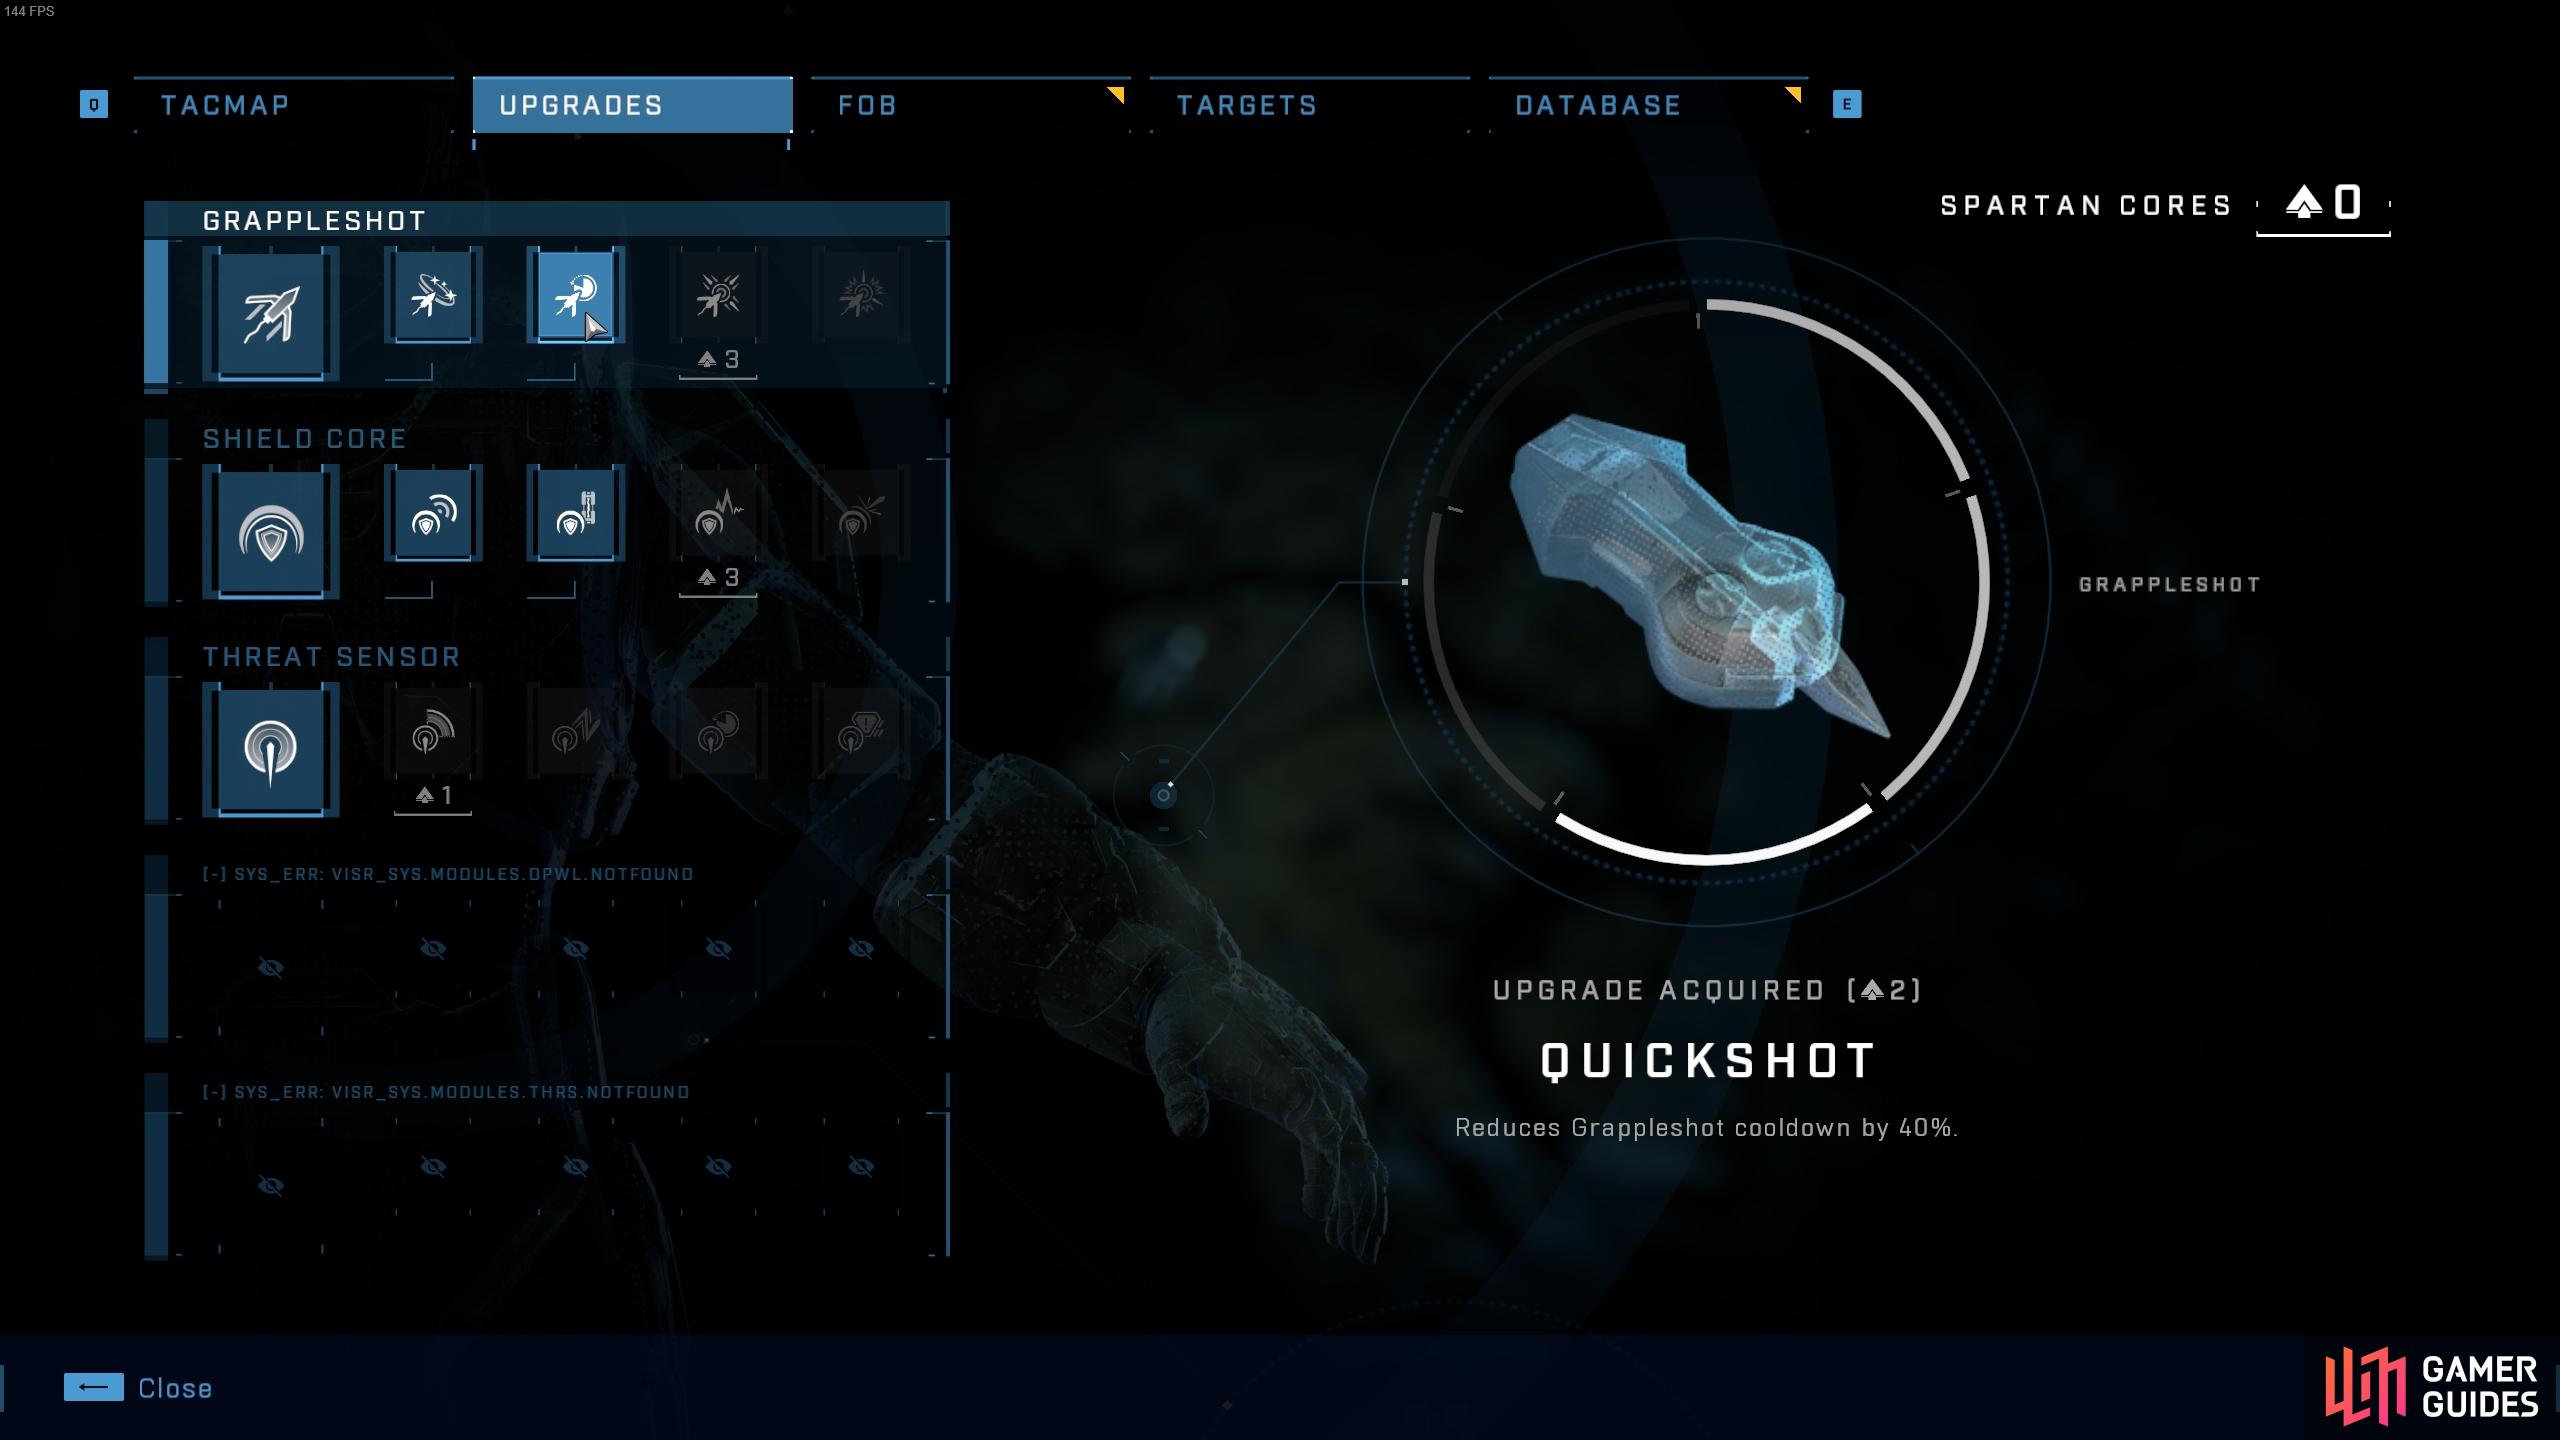 Upgrade the Grappleshot to Quickshot with Spartan Cores as soon as possible.